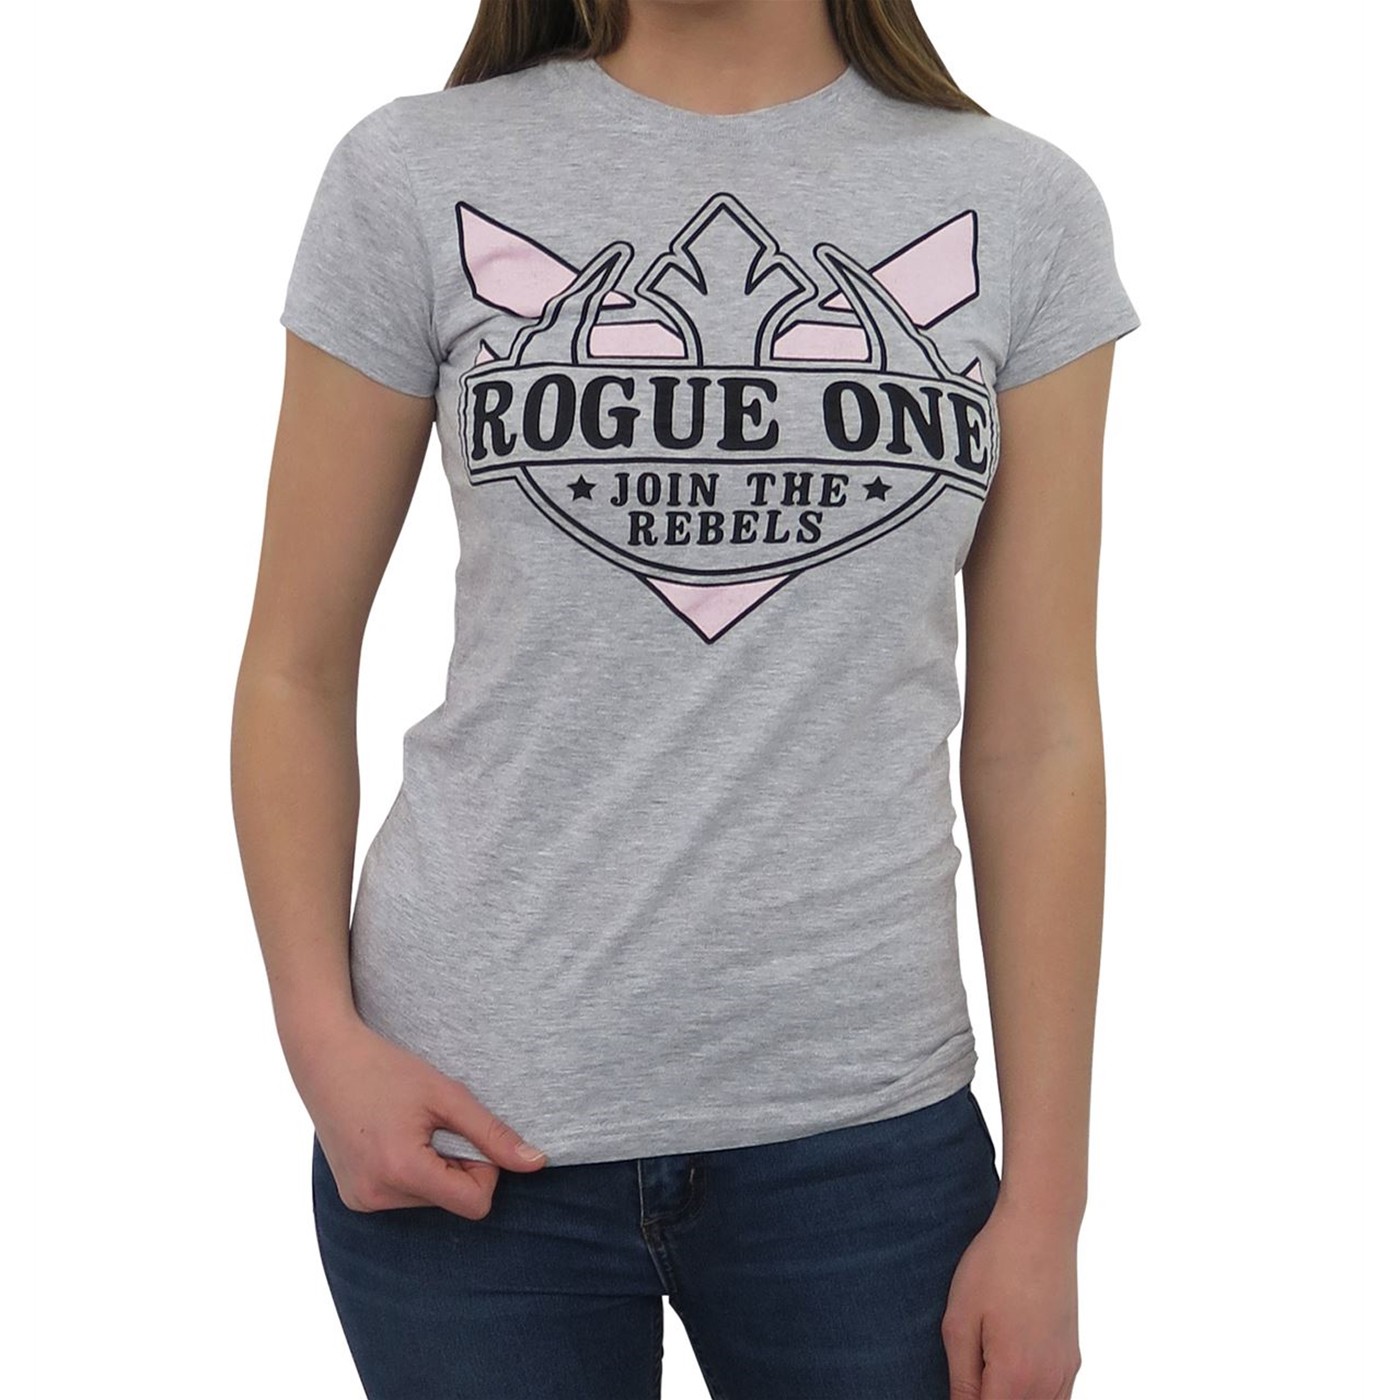 Star Wars Rogue One Join the Rebels Women's T-Shirt